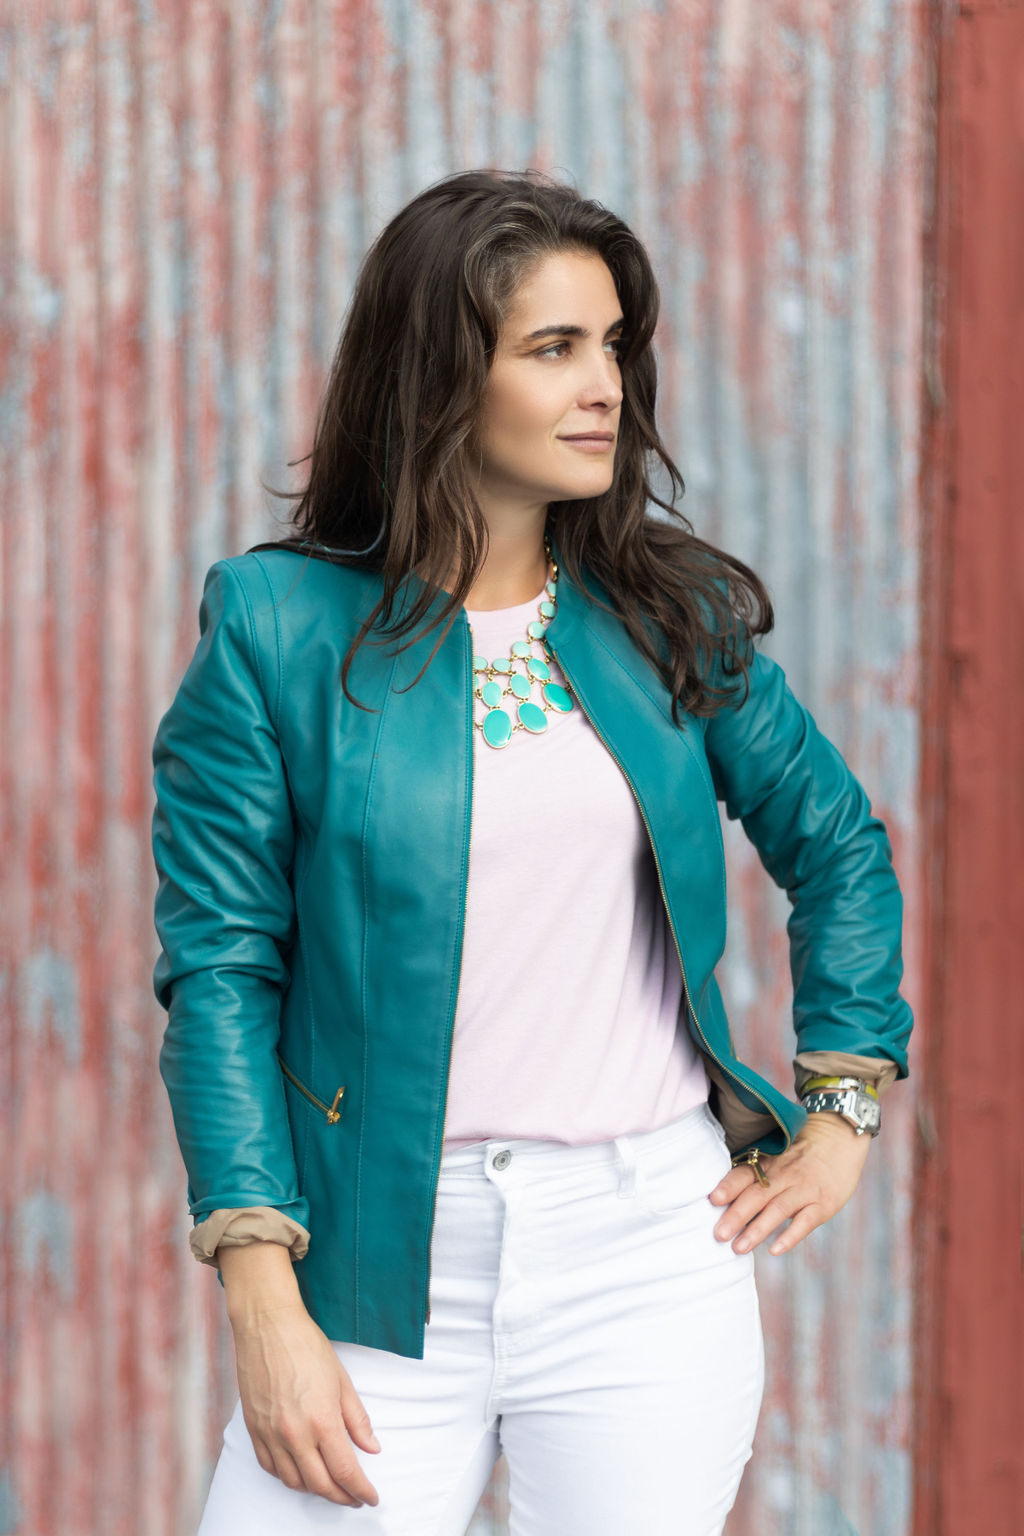 Woman in turquoise leather jacket and pink shirt in front of a red and blue wall.